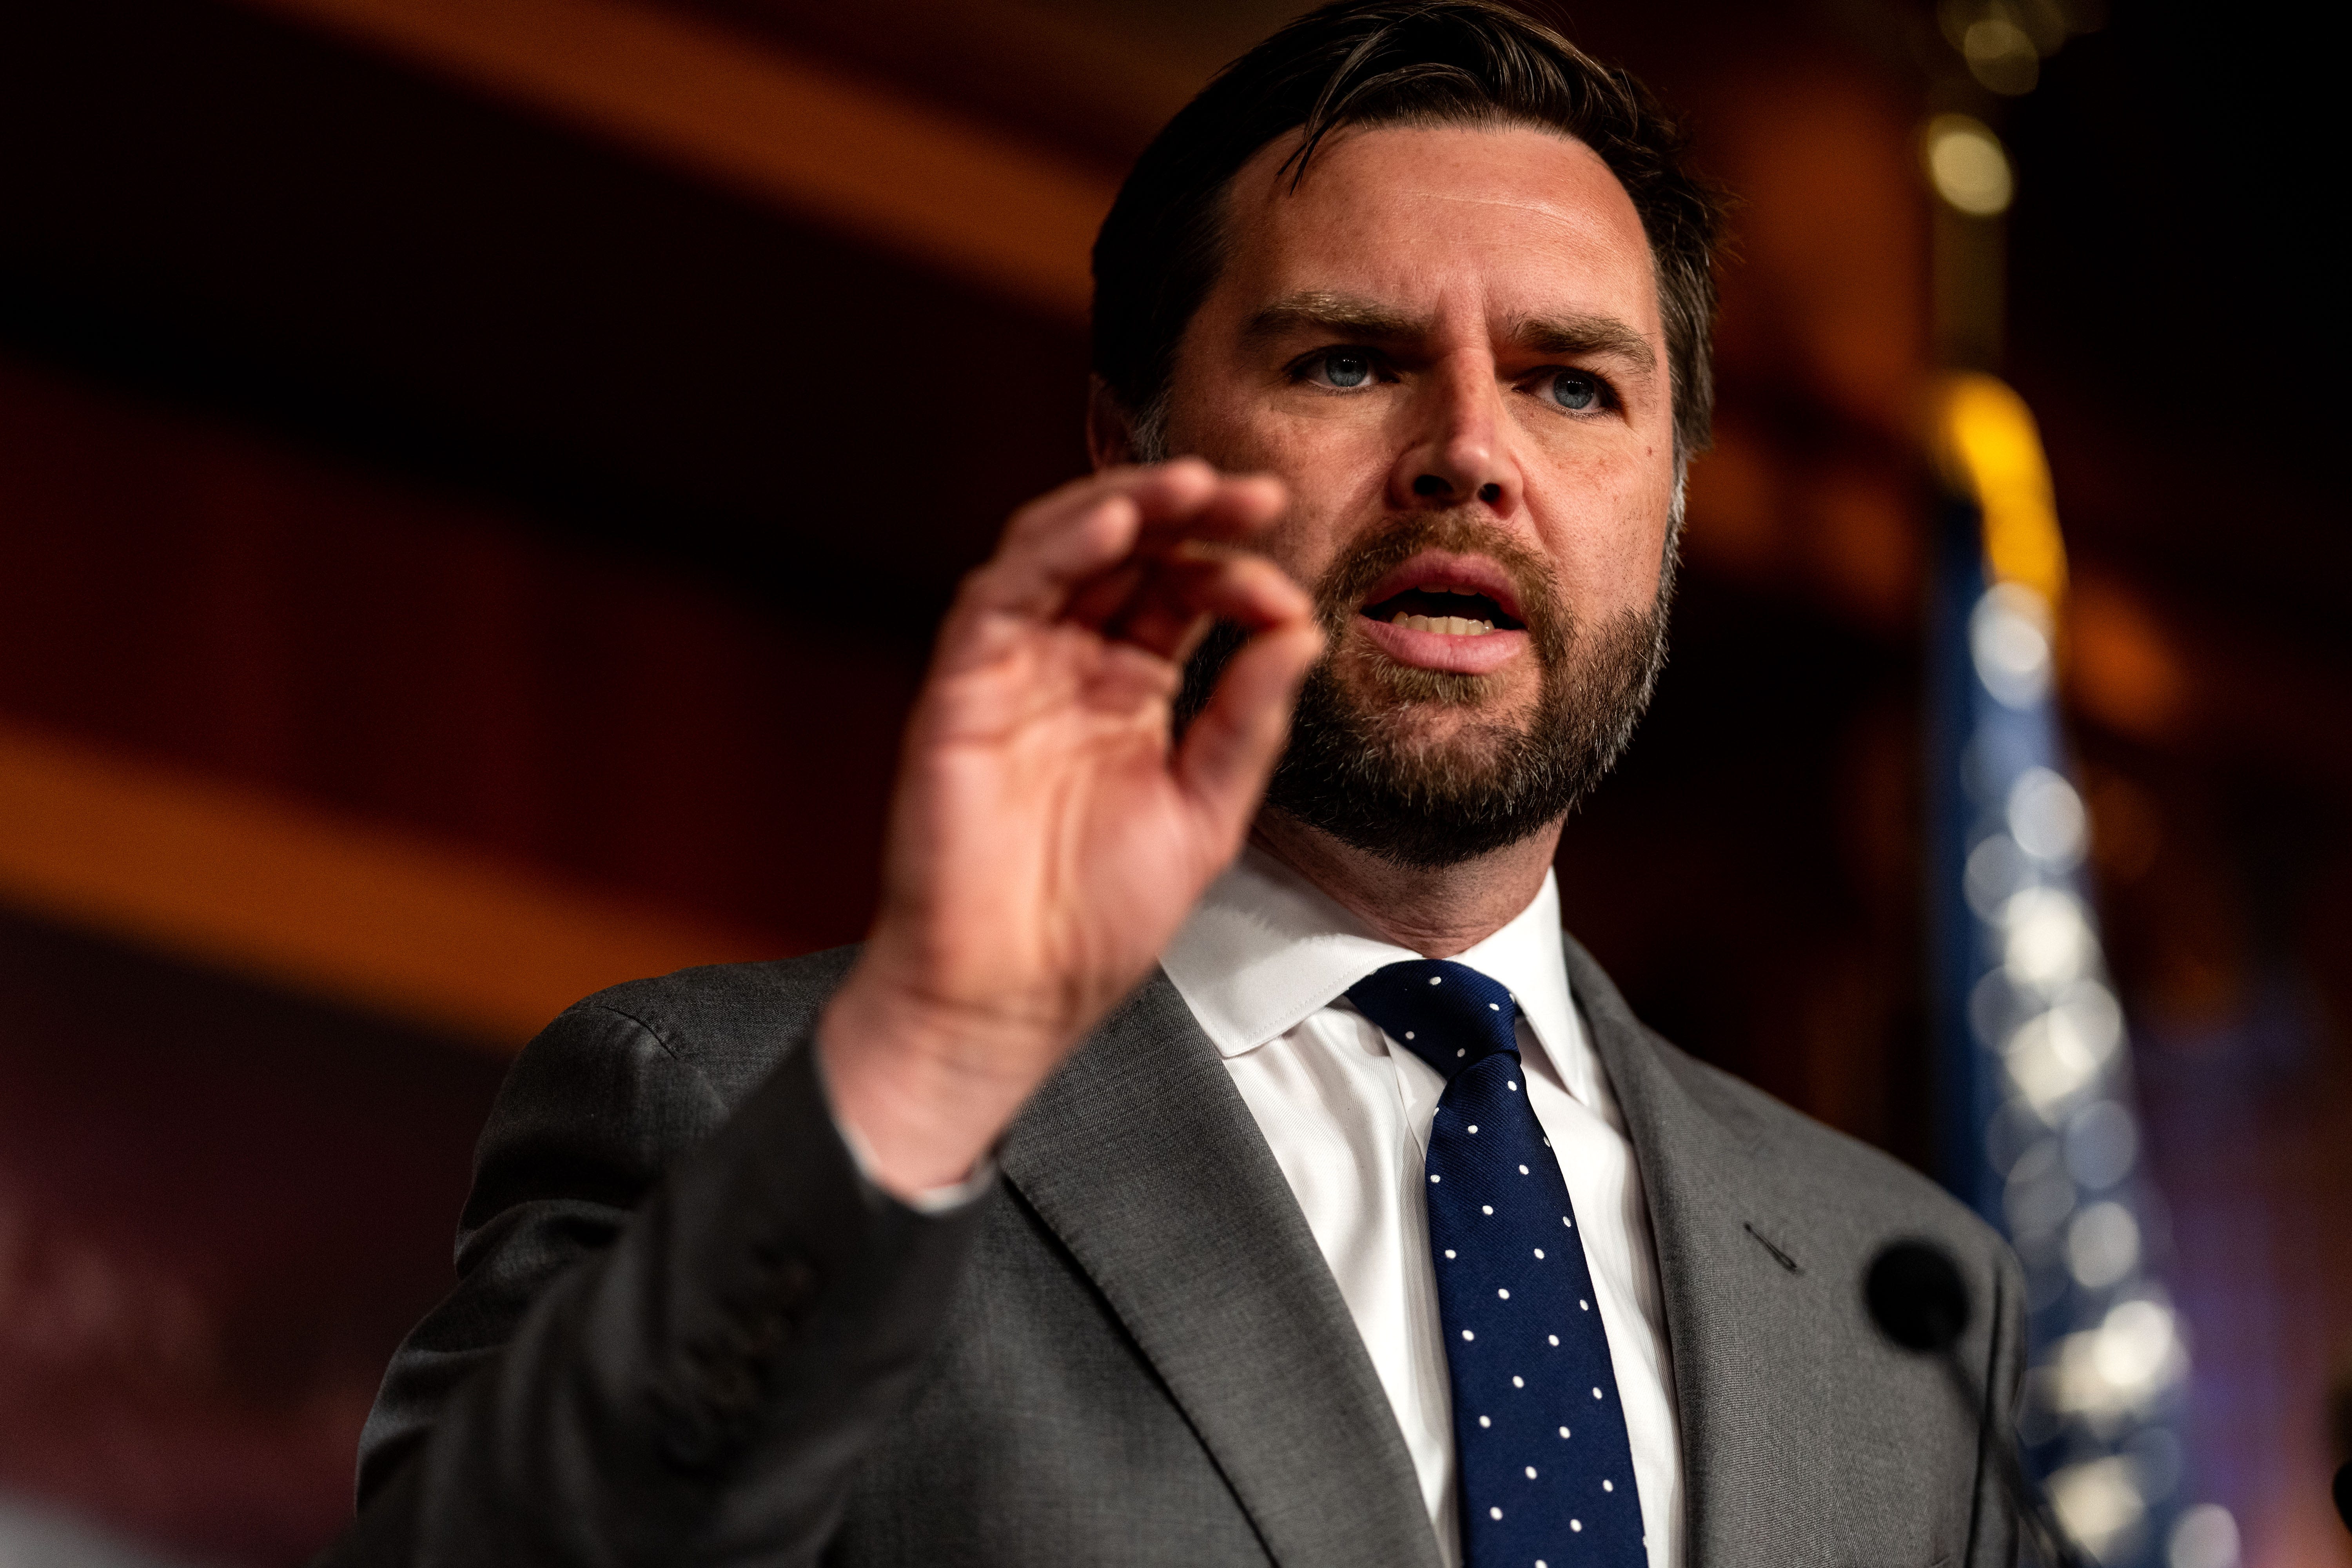 Trump made MAGA happen. JD Vance represents those who will inherit it